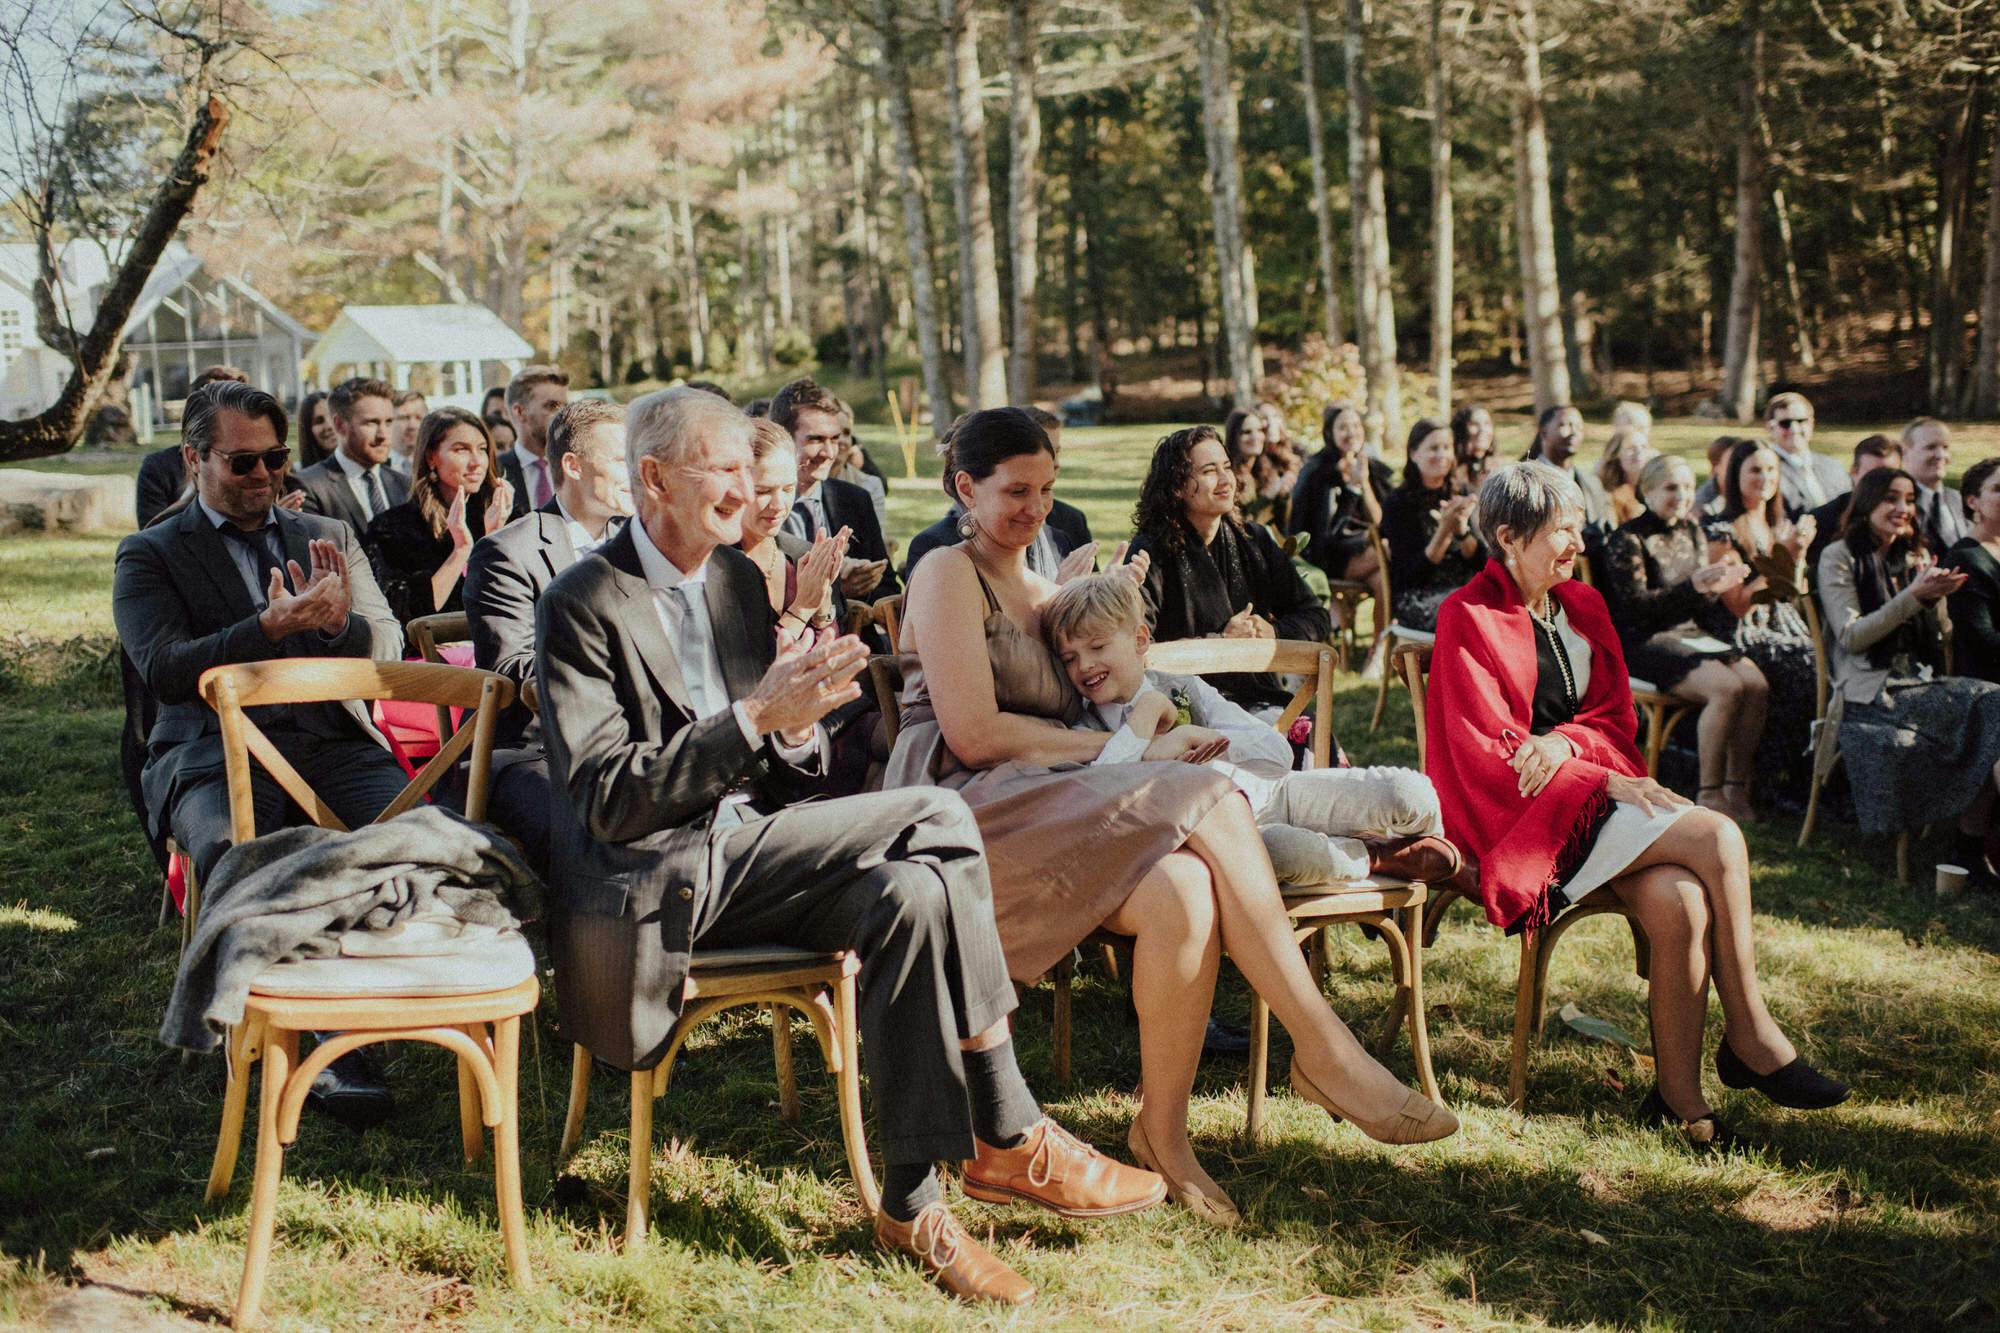 candid shots of guests at ceremony